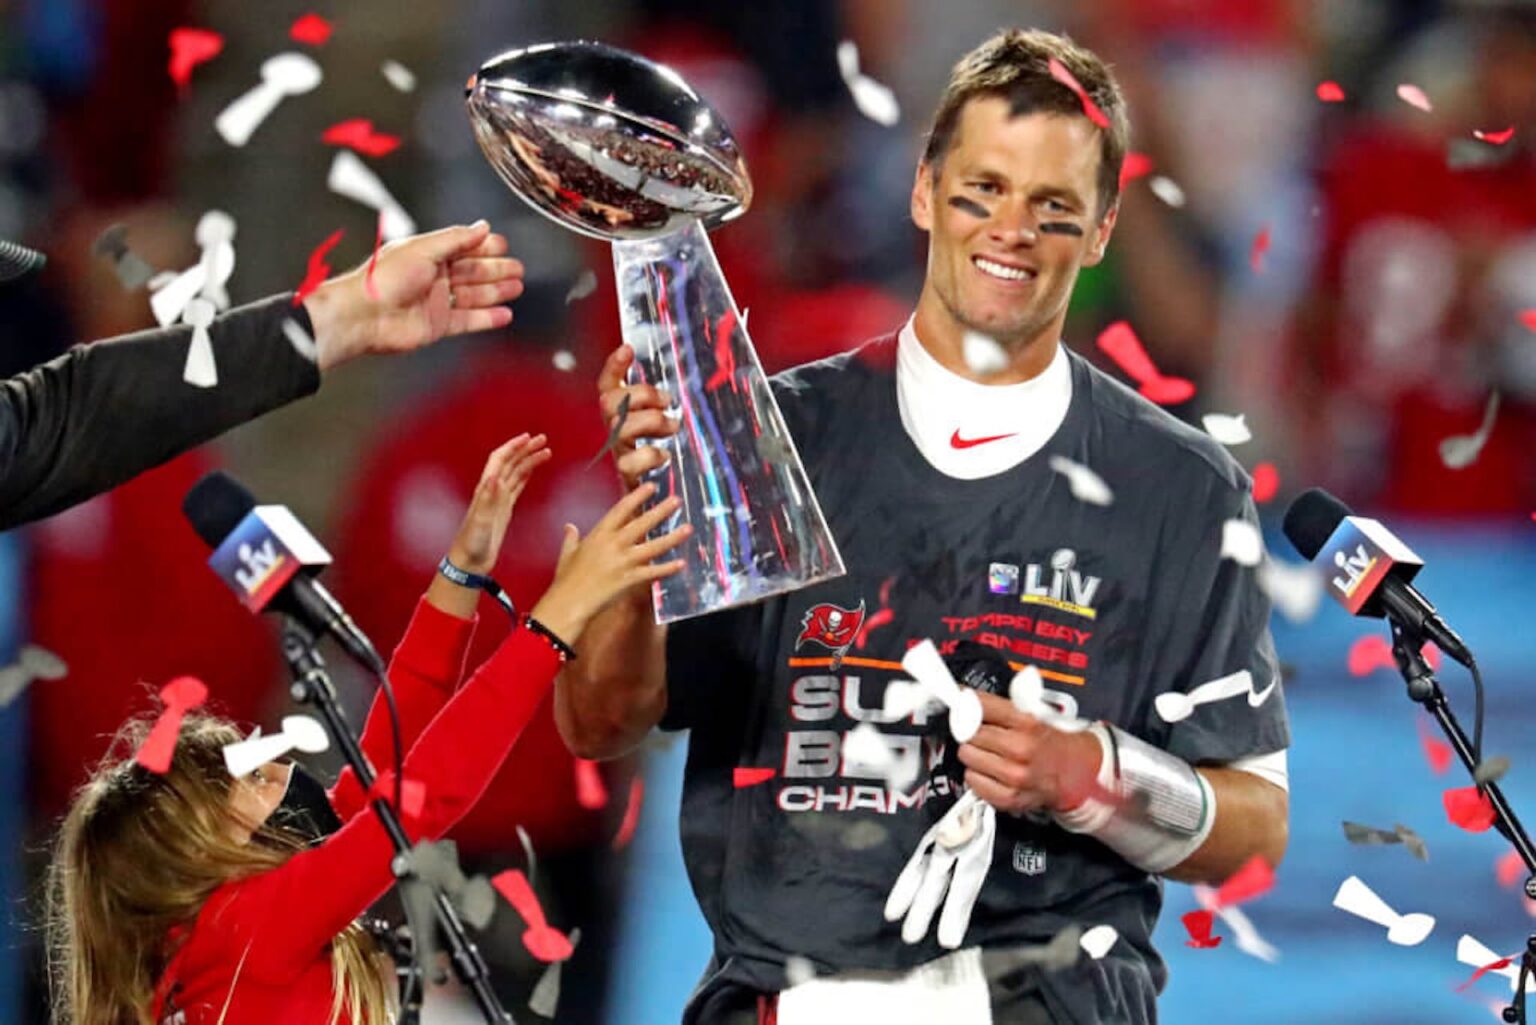 He's the NFL's golden boy, the star of many super bowls, and a long-time Patriot. Tom Brady is not leaving anytime soon! Take a peek at his net worth.